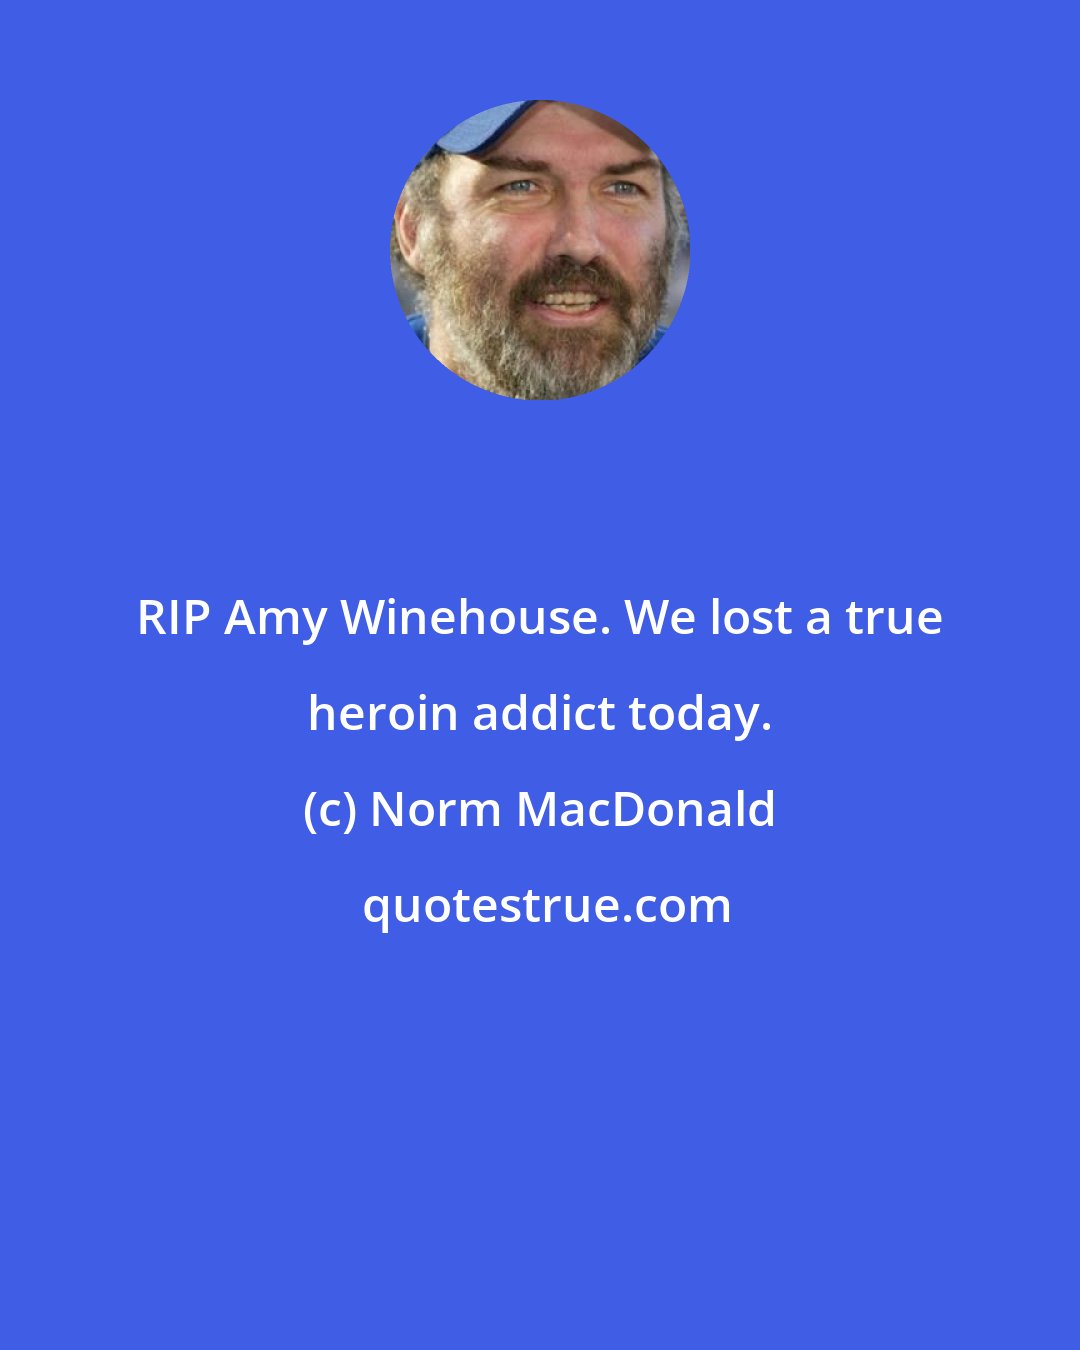 Norm MacDonald: RIP Amy Winehouse. We lost a true heroin addict today.